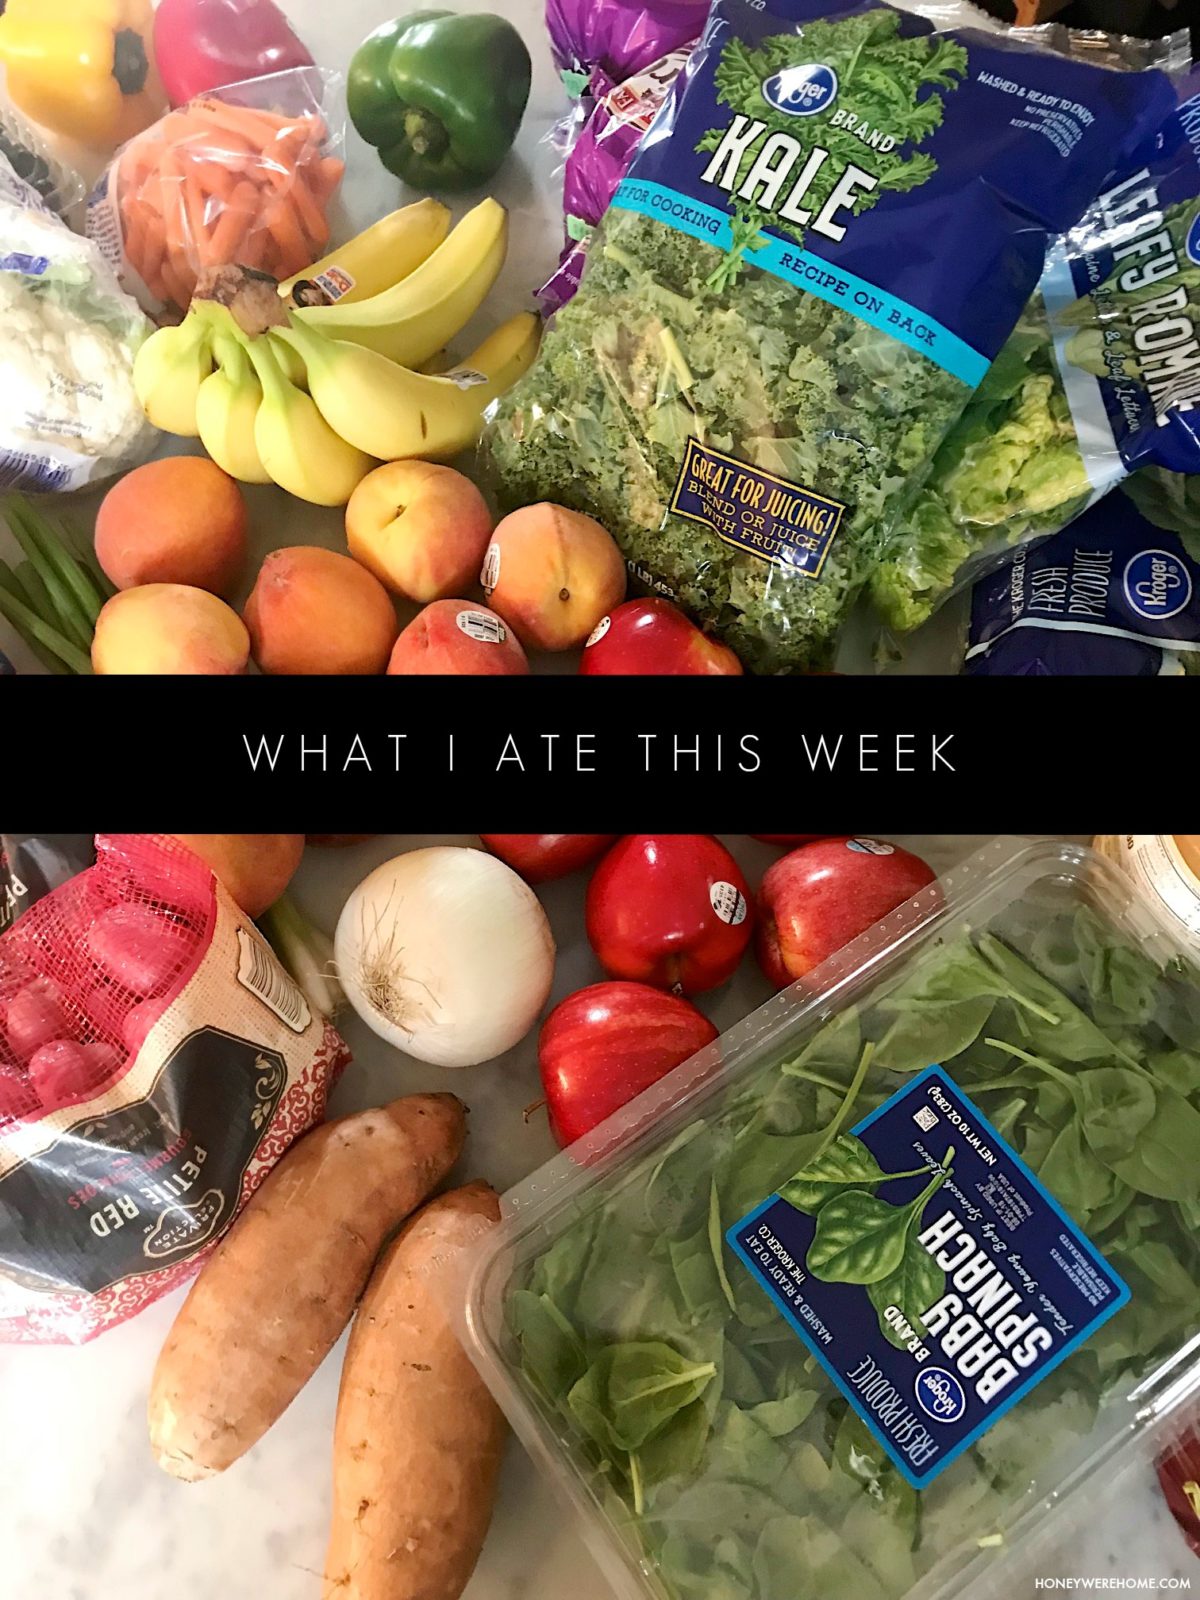 WHAT I ATE THIS WEEK